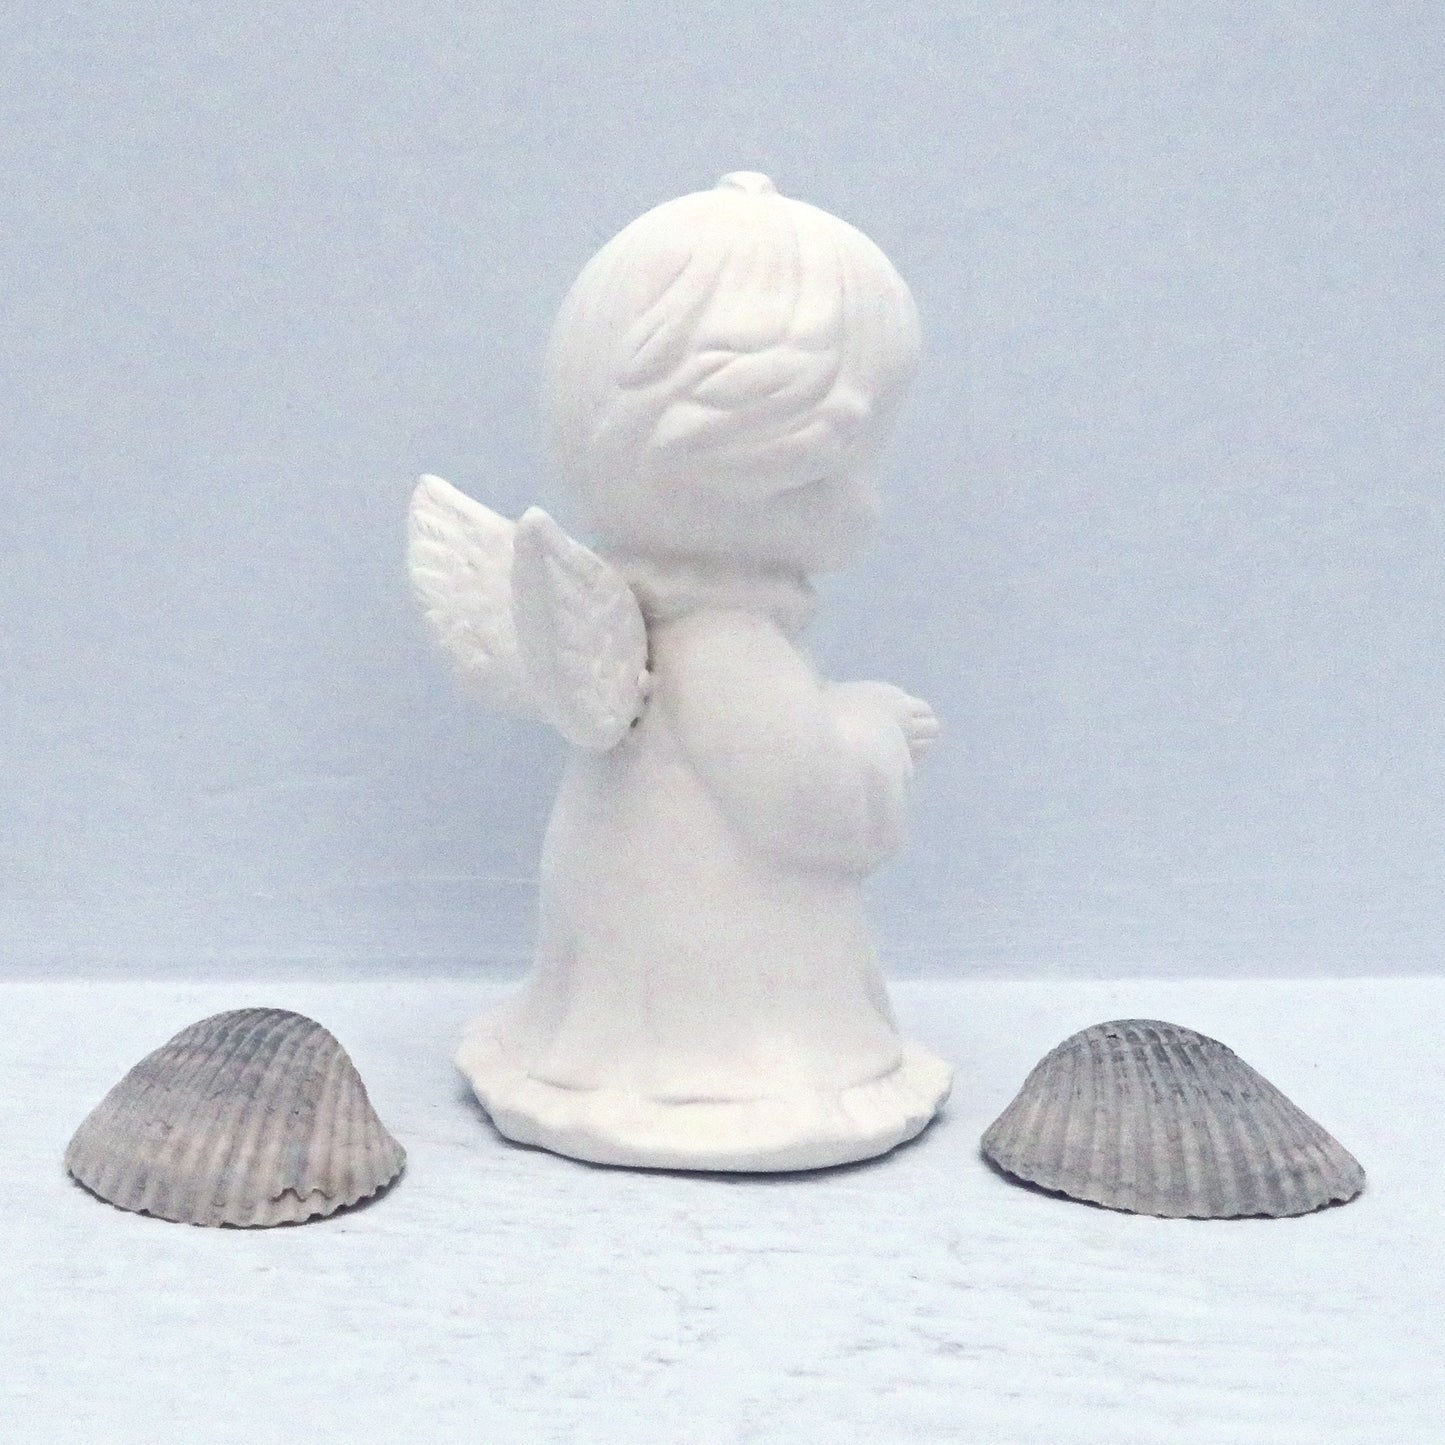 Unpainted Ceramic Angel Figurine / Angel Gift / Angel Statue / Paint it Yourself / Ready to Paint / Ceramics to Paint / Angel Decor / Bisque